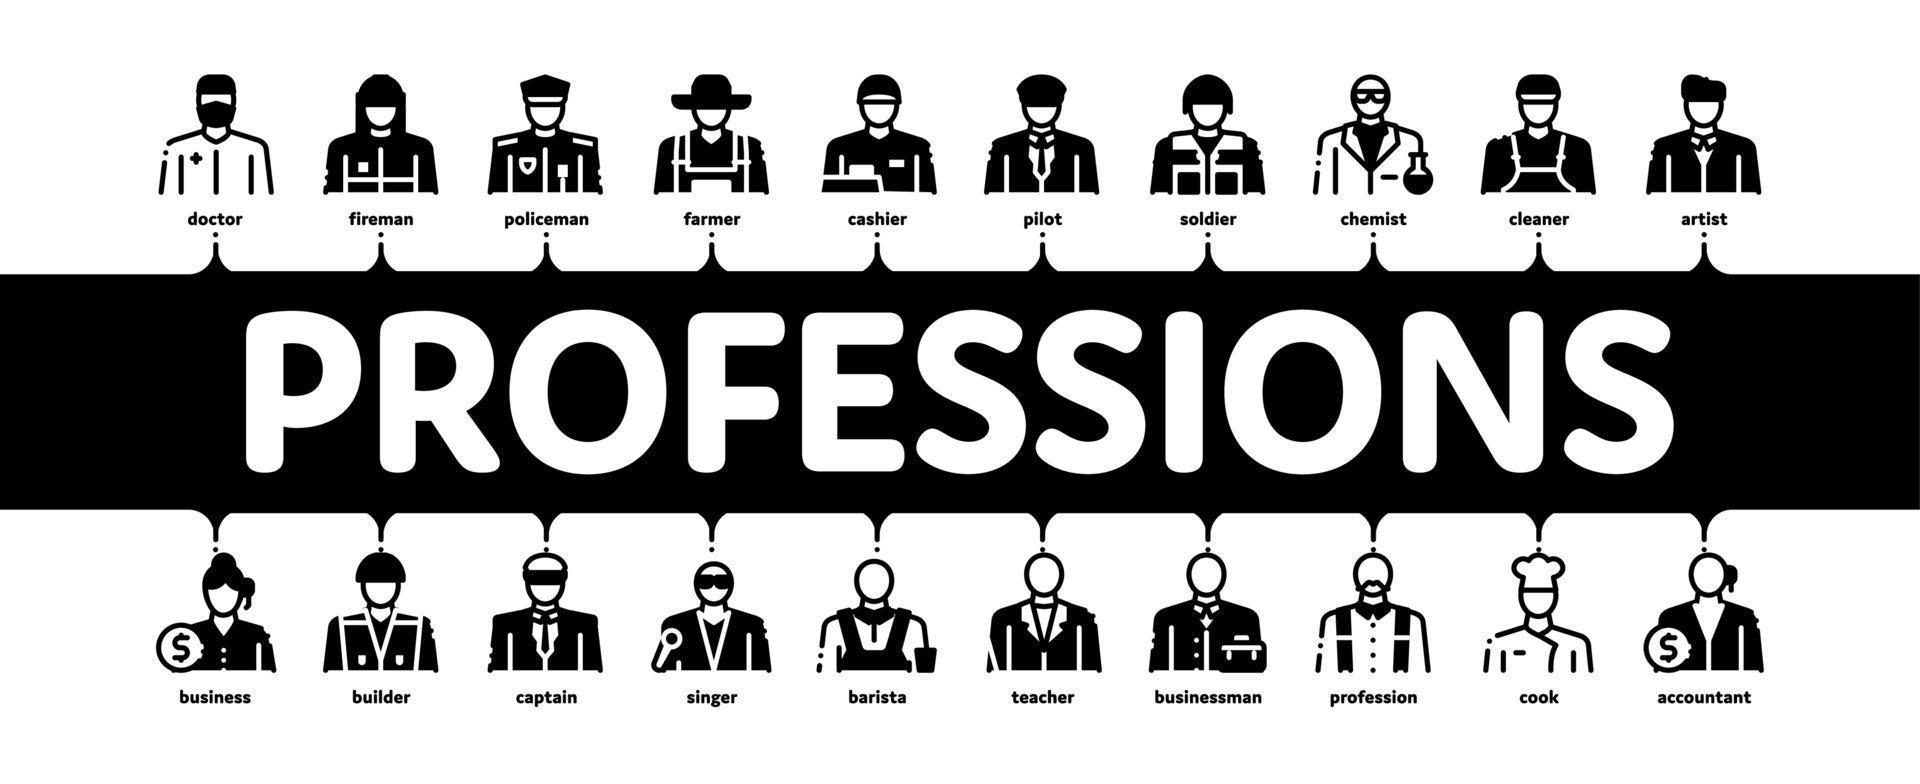 Professions People Minimal Infographic Banner Vector